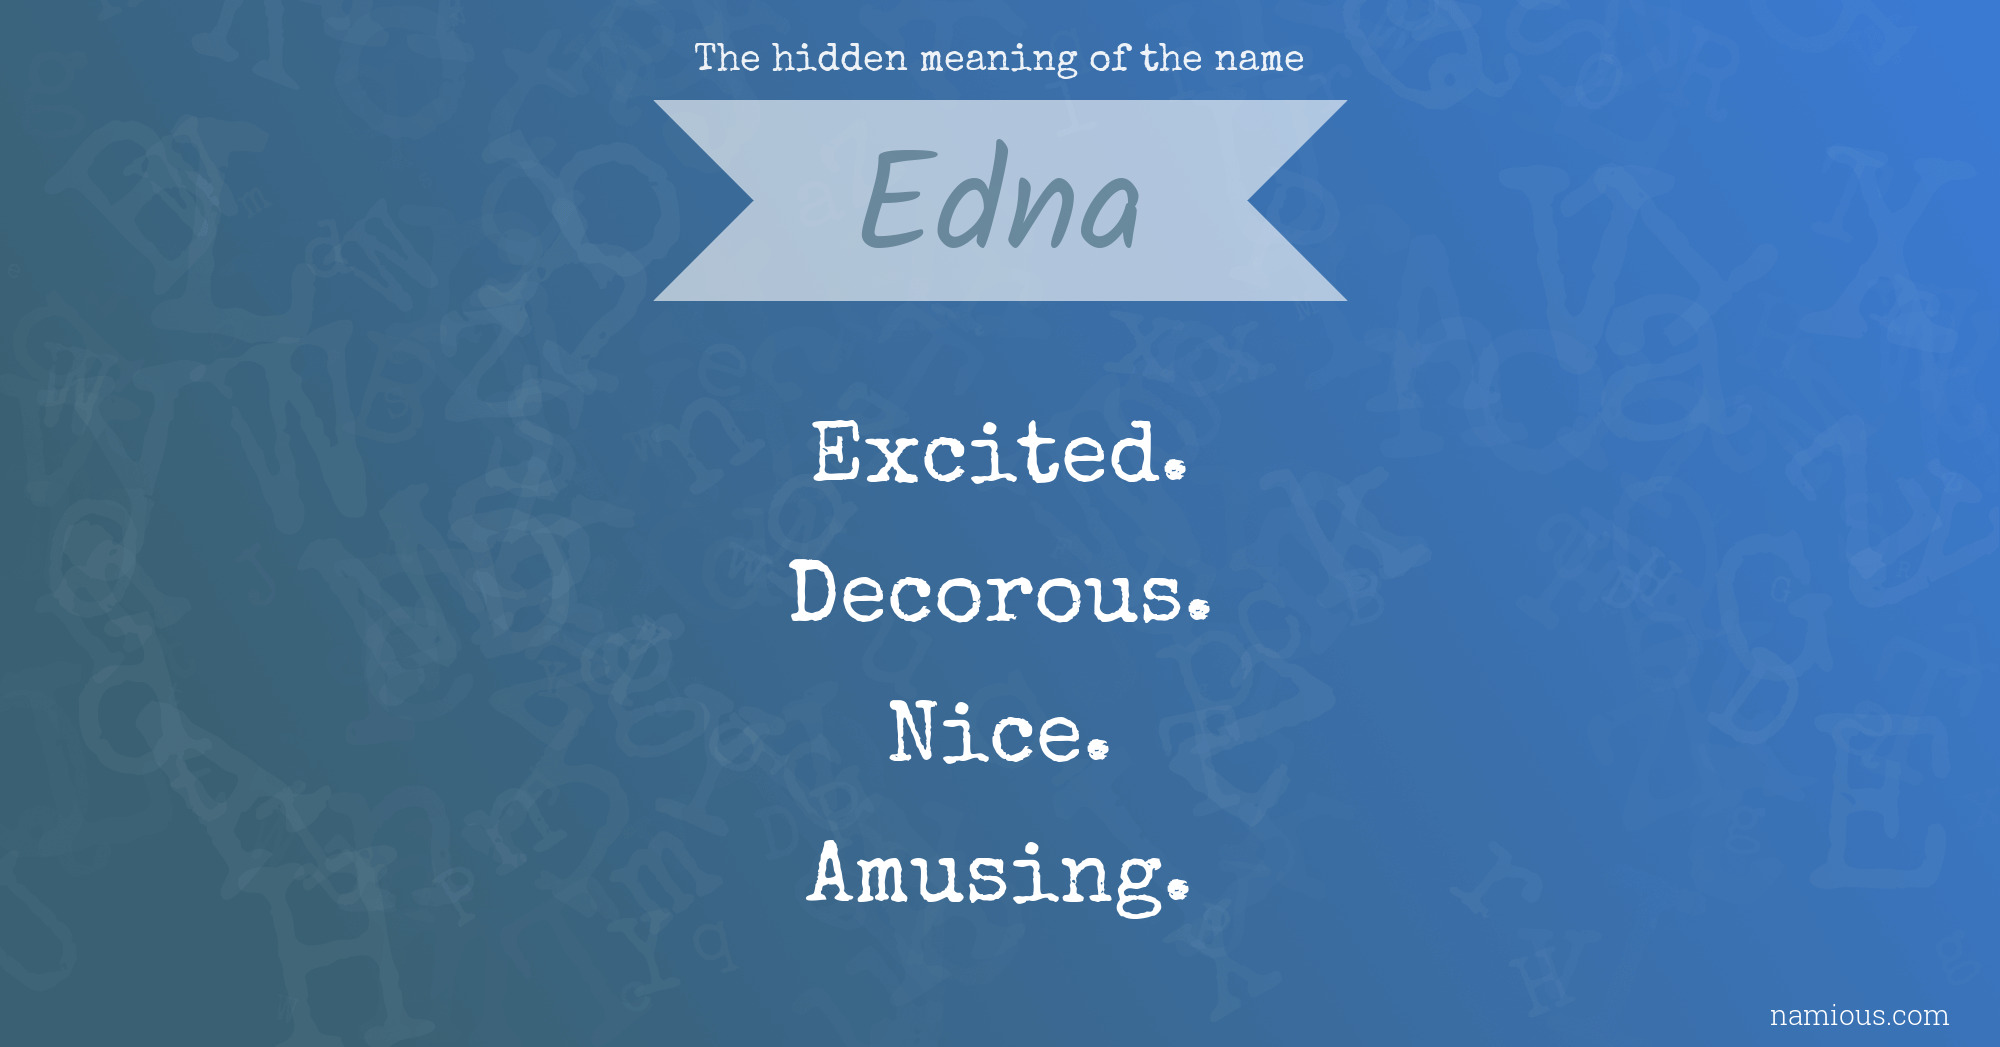 The hidden meaning of the name Edna